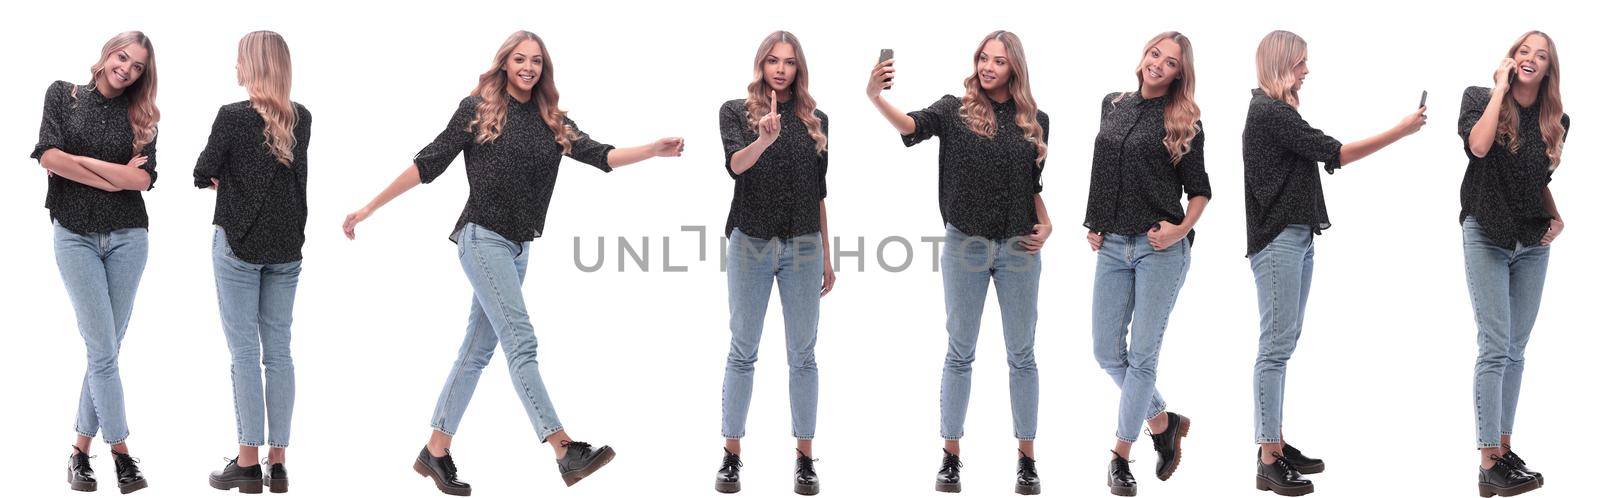 photo collage of a modern young woman with a smartphone by asdf